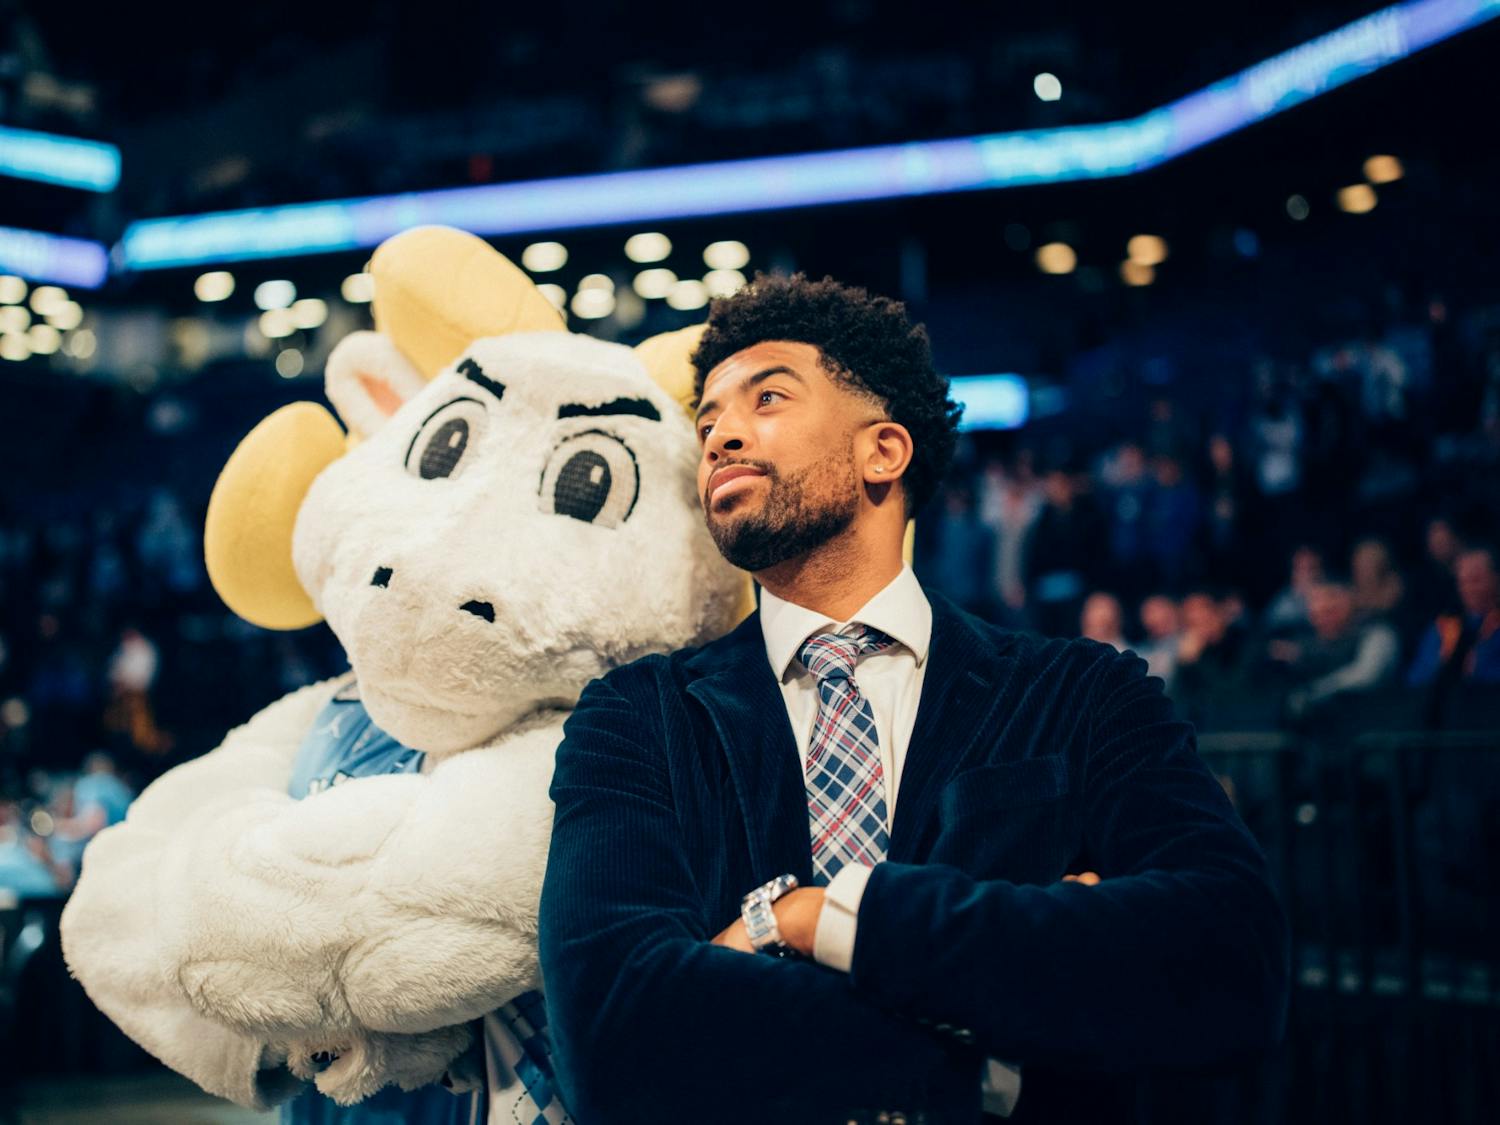 ACC Network Analyst and former Tar Heel KJ Smith poses with Rameses at the ACC Men's Basketball Tournament on March 11, 2022 at the Barclays Center. Photo courtesy of Jeff Armstrong.